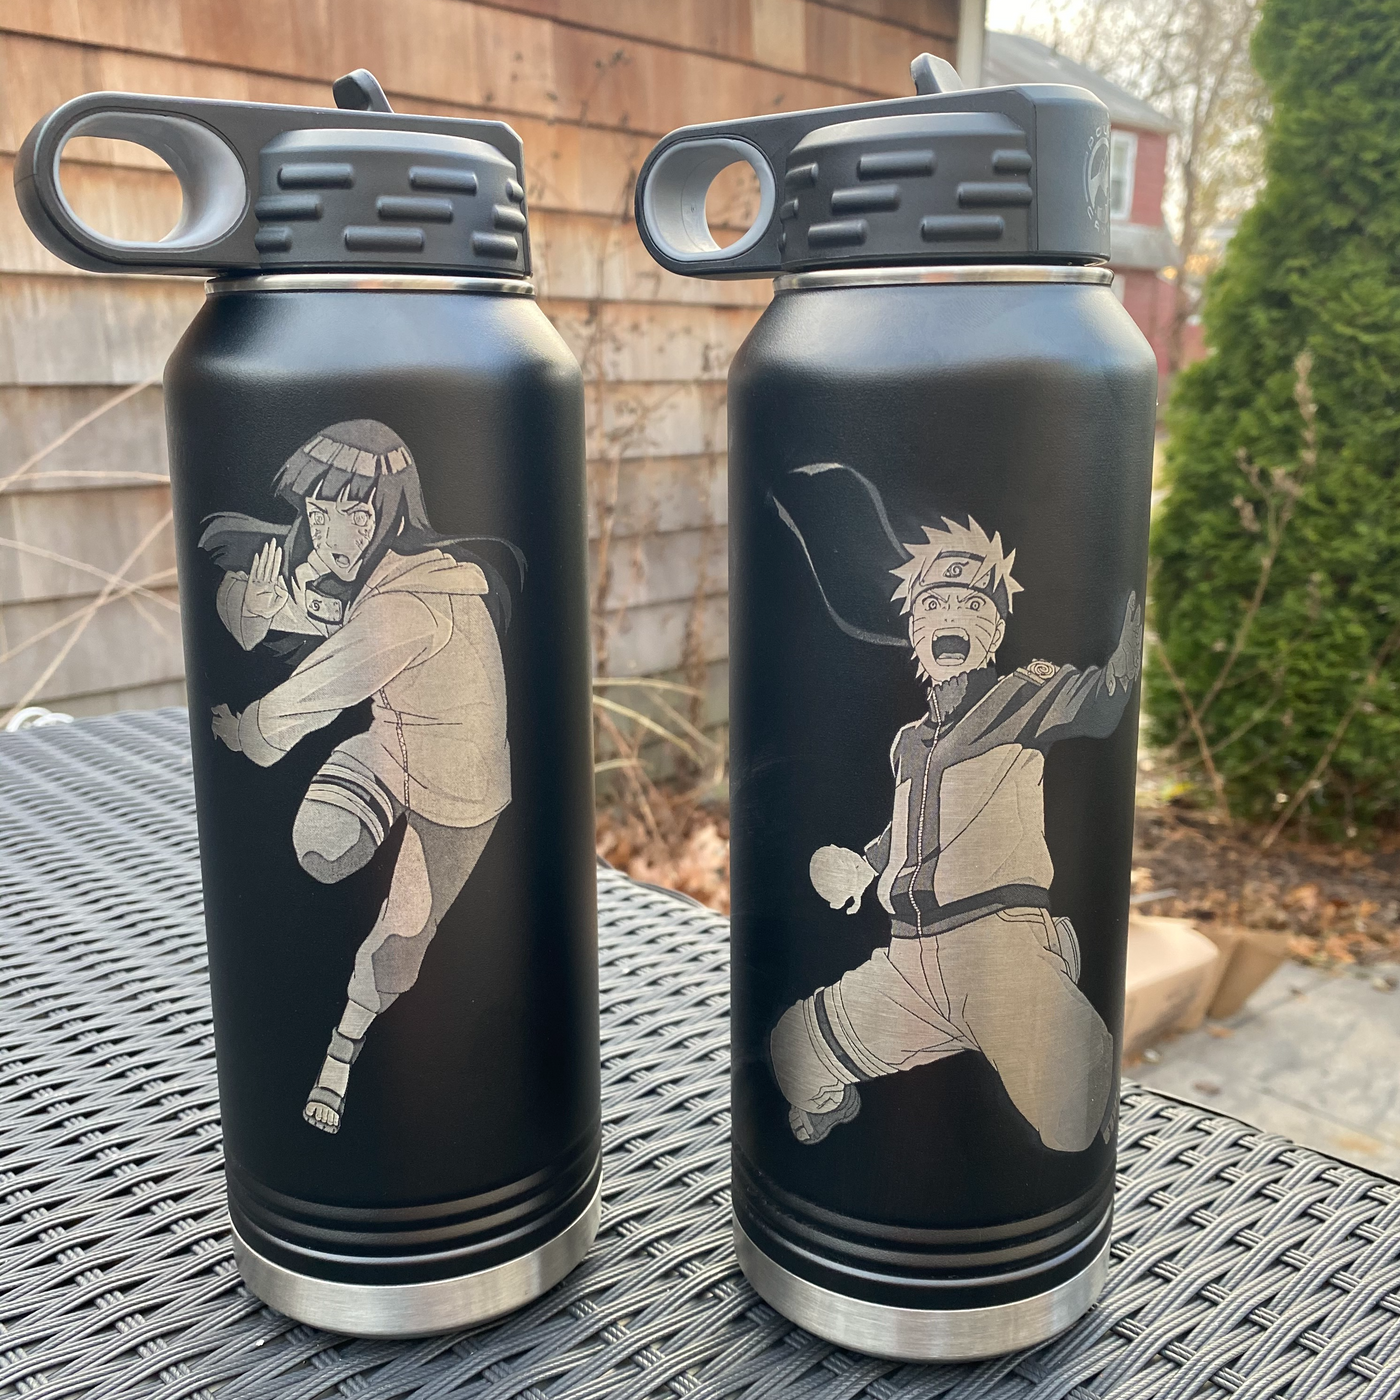 Toynk's New Anime and Video Game Water Bottles | The Pop Insider